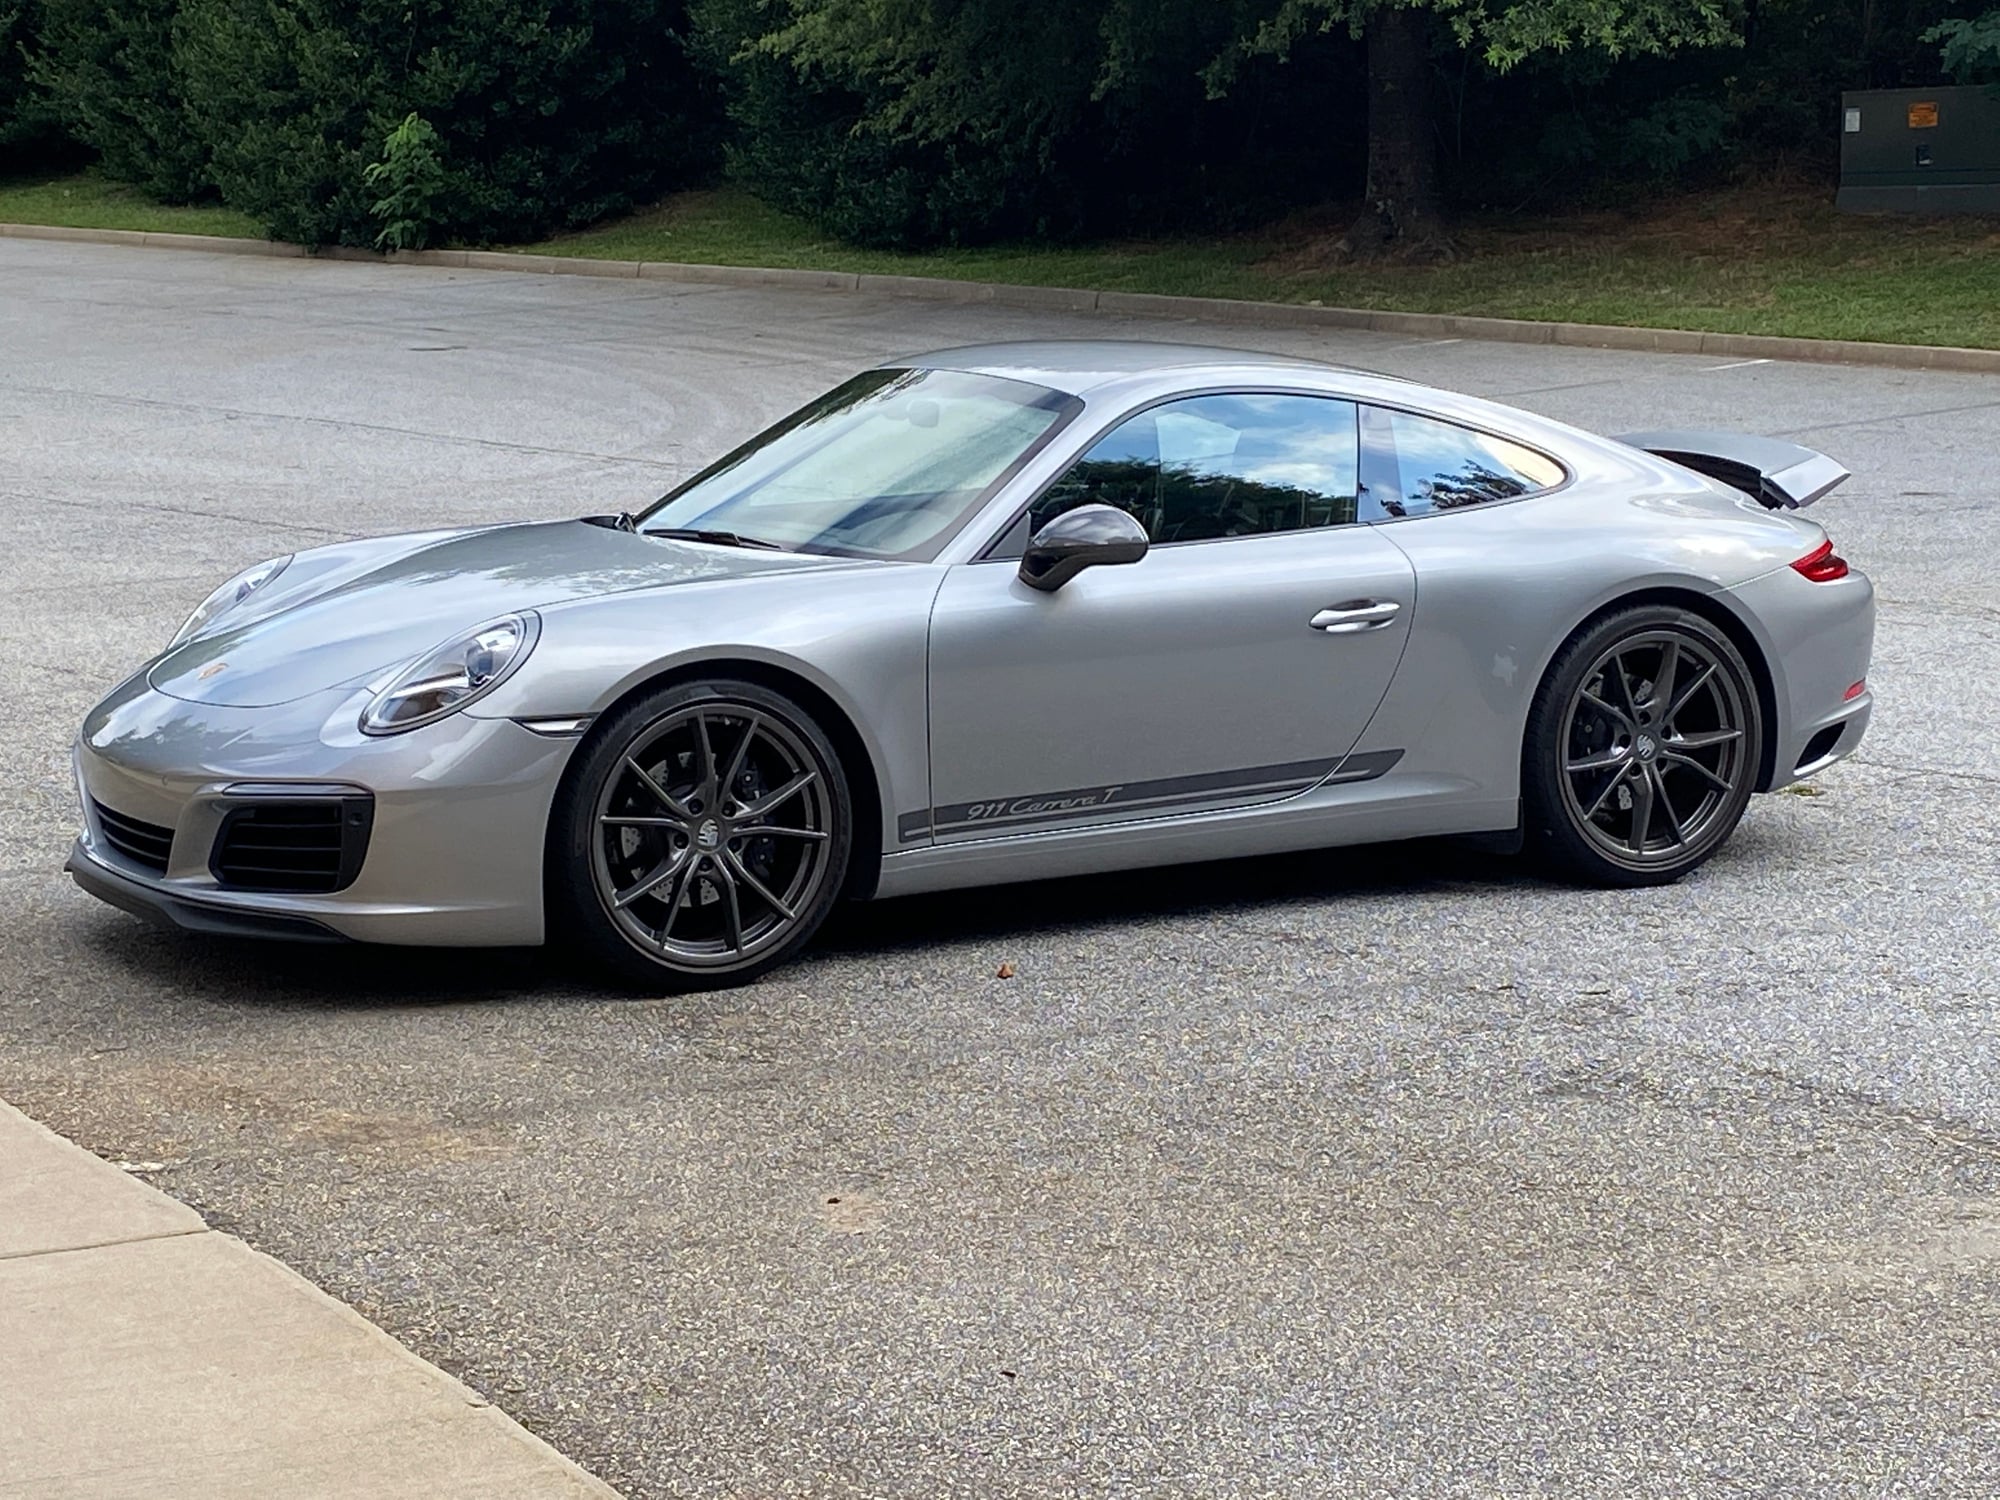 2018 Porsche 911 - 2018 Carrera T, MANUAL, 11.5k miles, GT Silver, carbon buckets, slicktop, no mods - Used - VIN WP0AA2A92JS106269 - 11,500 Miles - 6 cyl - 2WD - Manual - Coupe - Silver - Simpsonville, SC 29680, United States